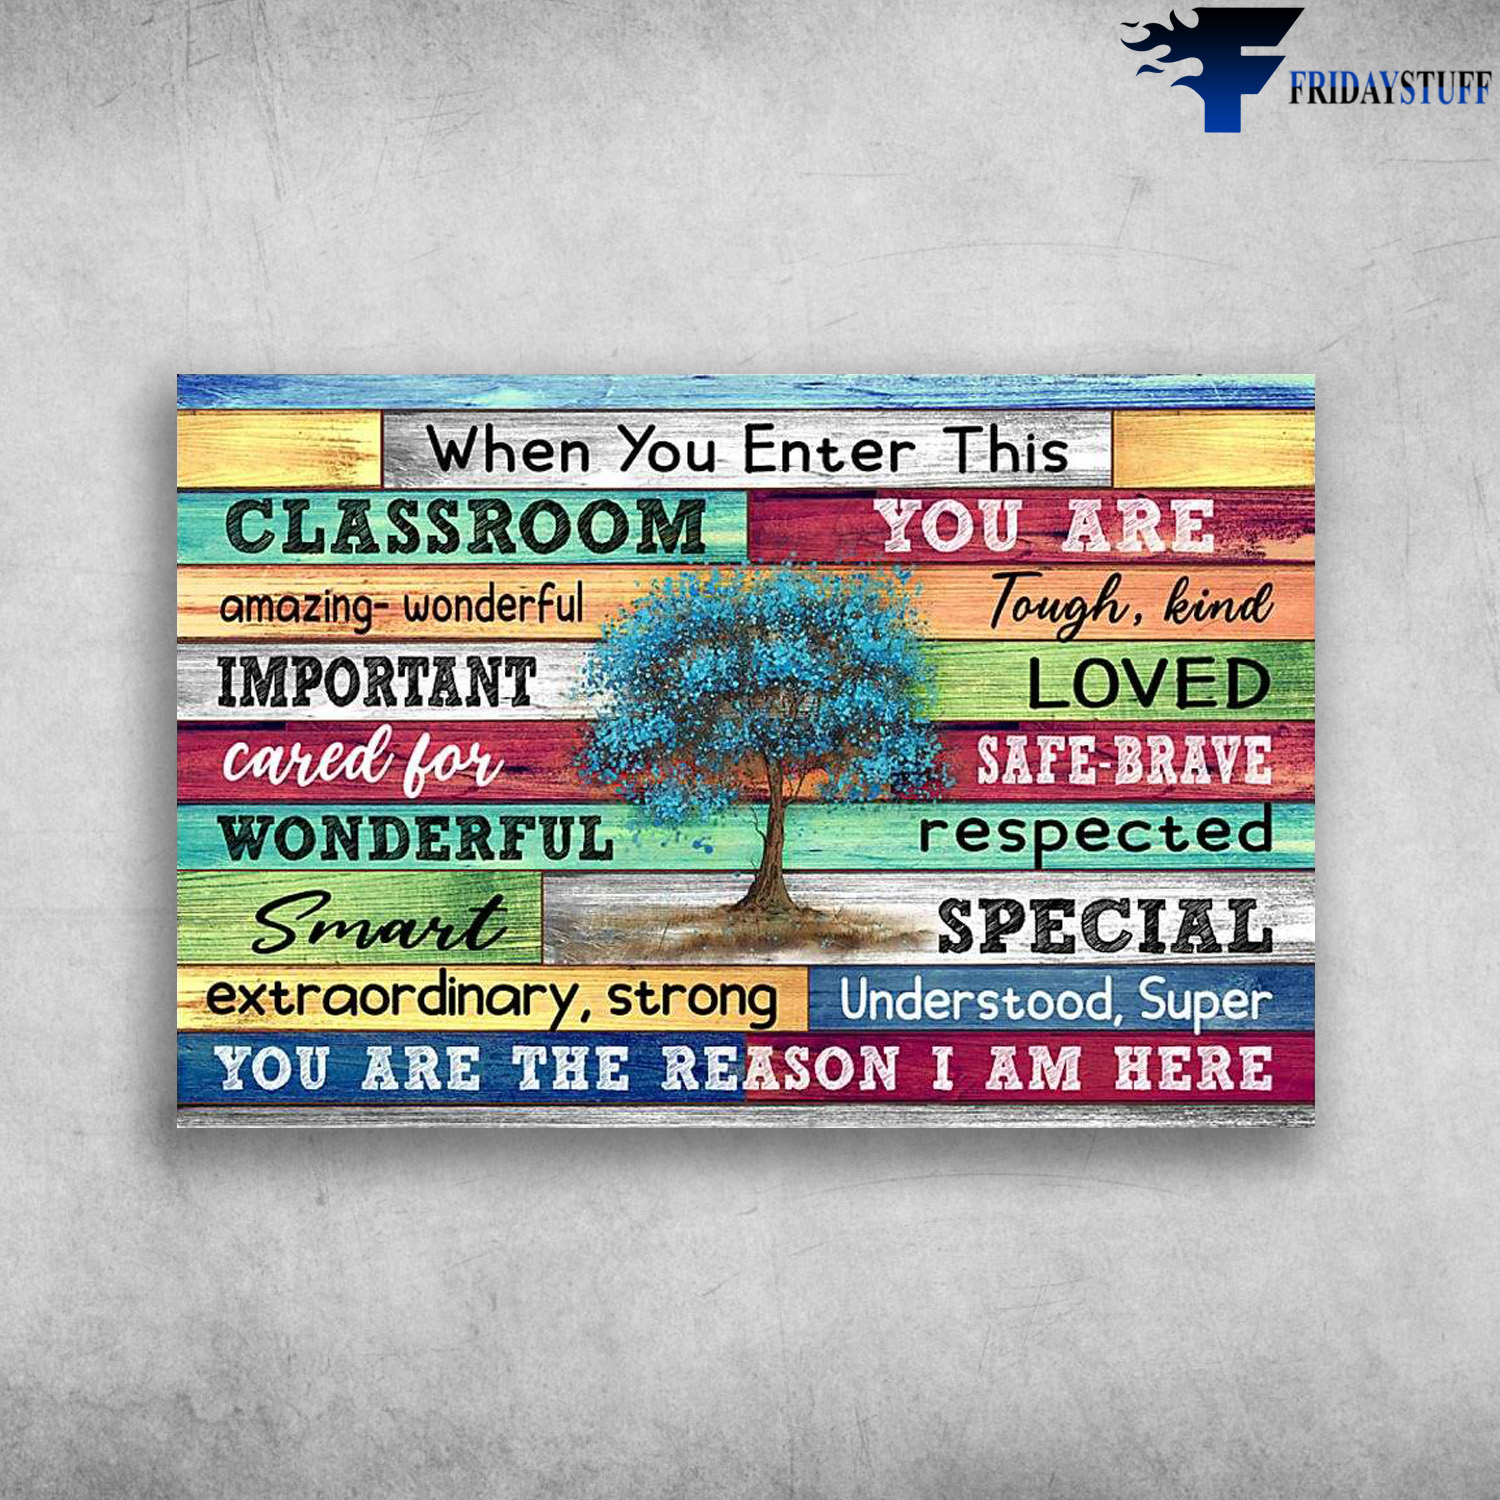 Classroom Rules – When You Enter This Classroom, You Are Amazing, Wonderful, Tough, Kind, Important, Loved, Cared For Wonderful, Smart, You Are The Reason I Am Here